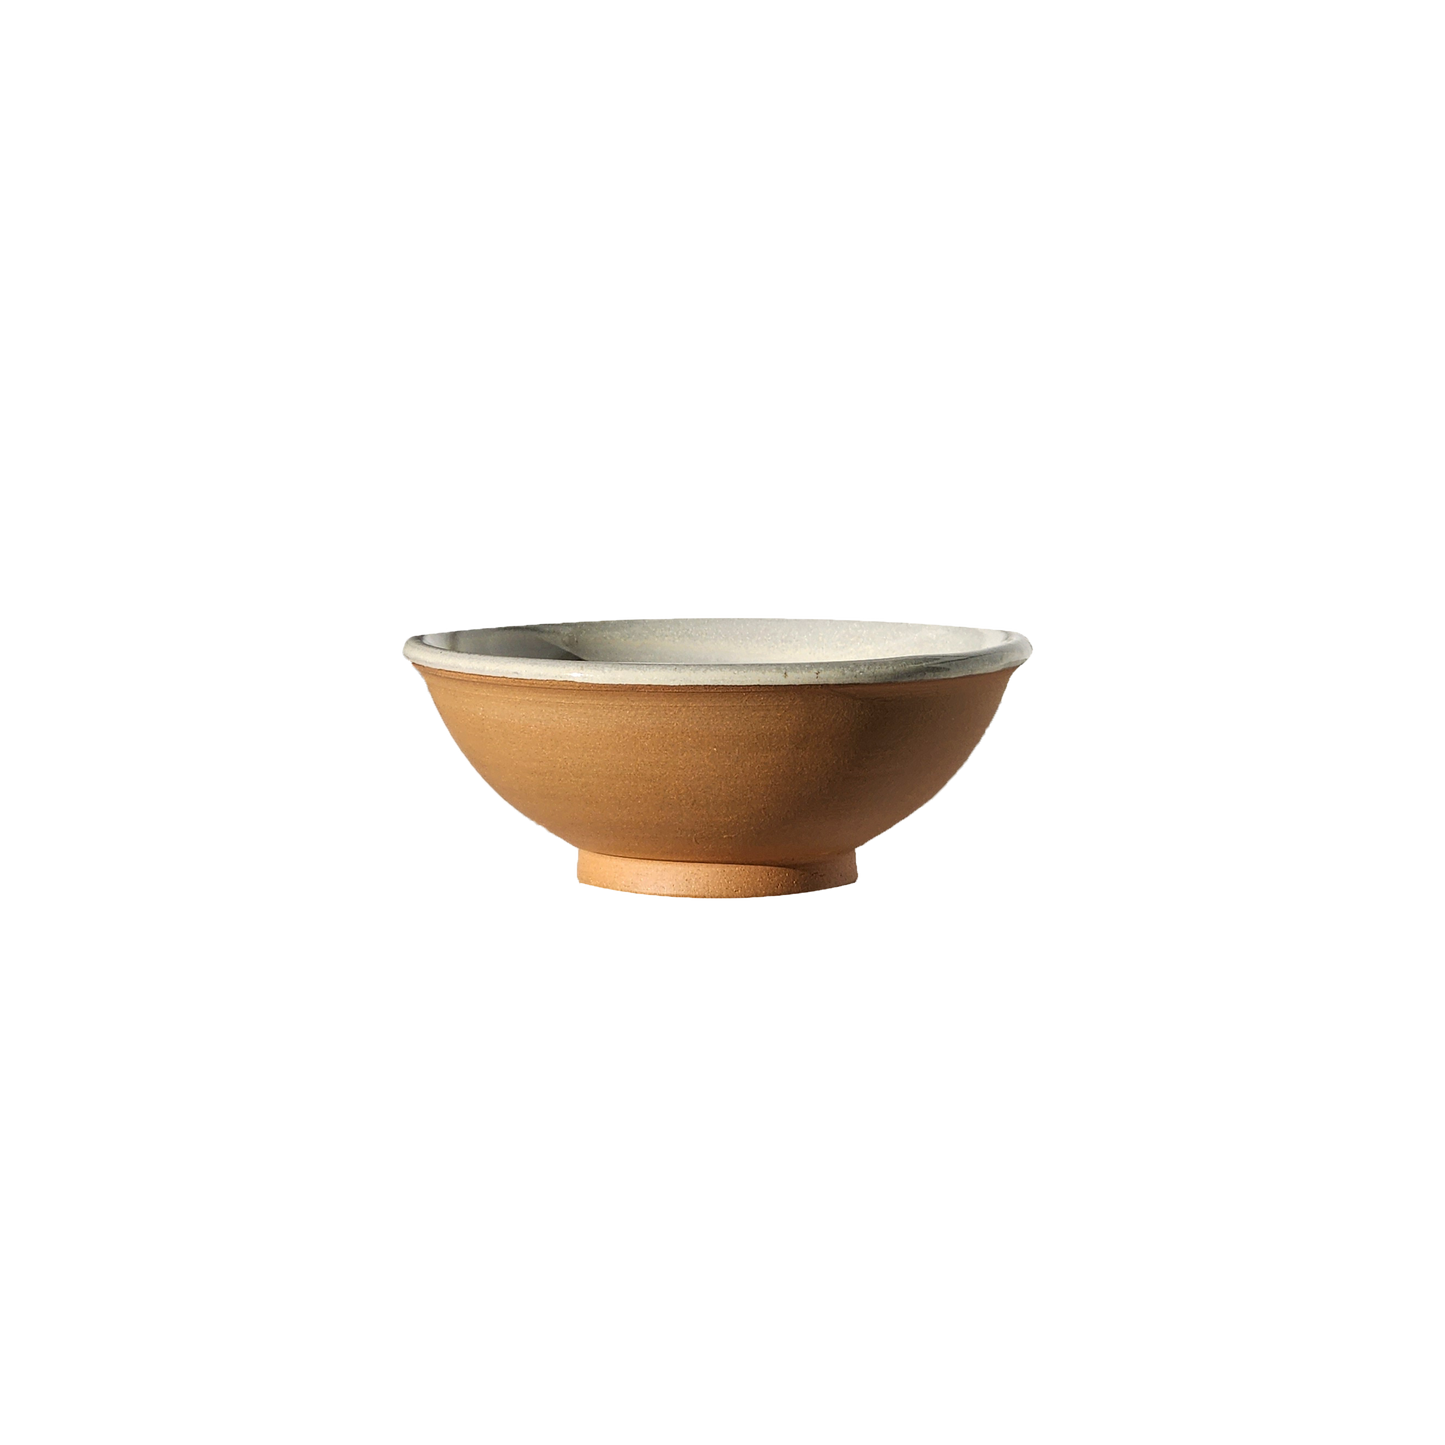 Image: A ceramic bowl in natural, unglazed finish, embodying the raw beauty of handmade pottery. Sized at 1 cup, it adds an organic touch to your table setting.